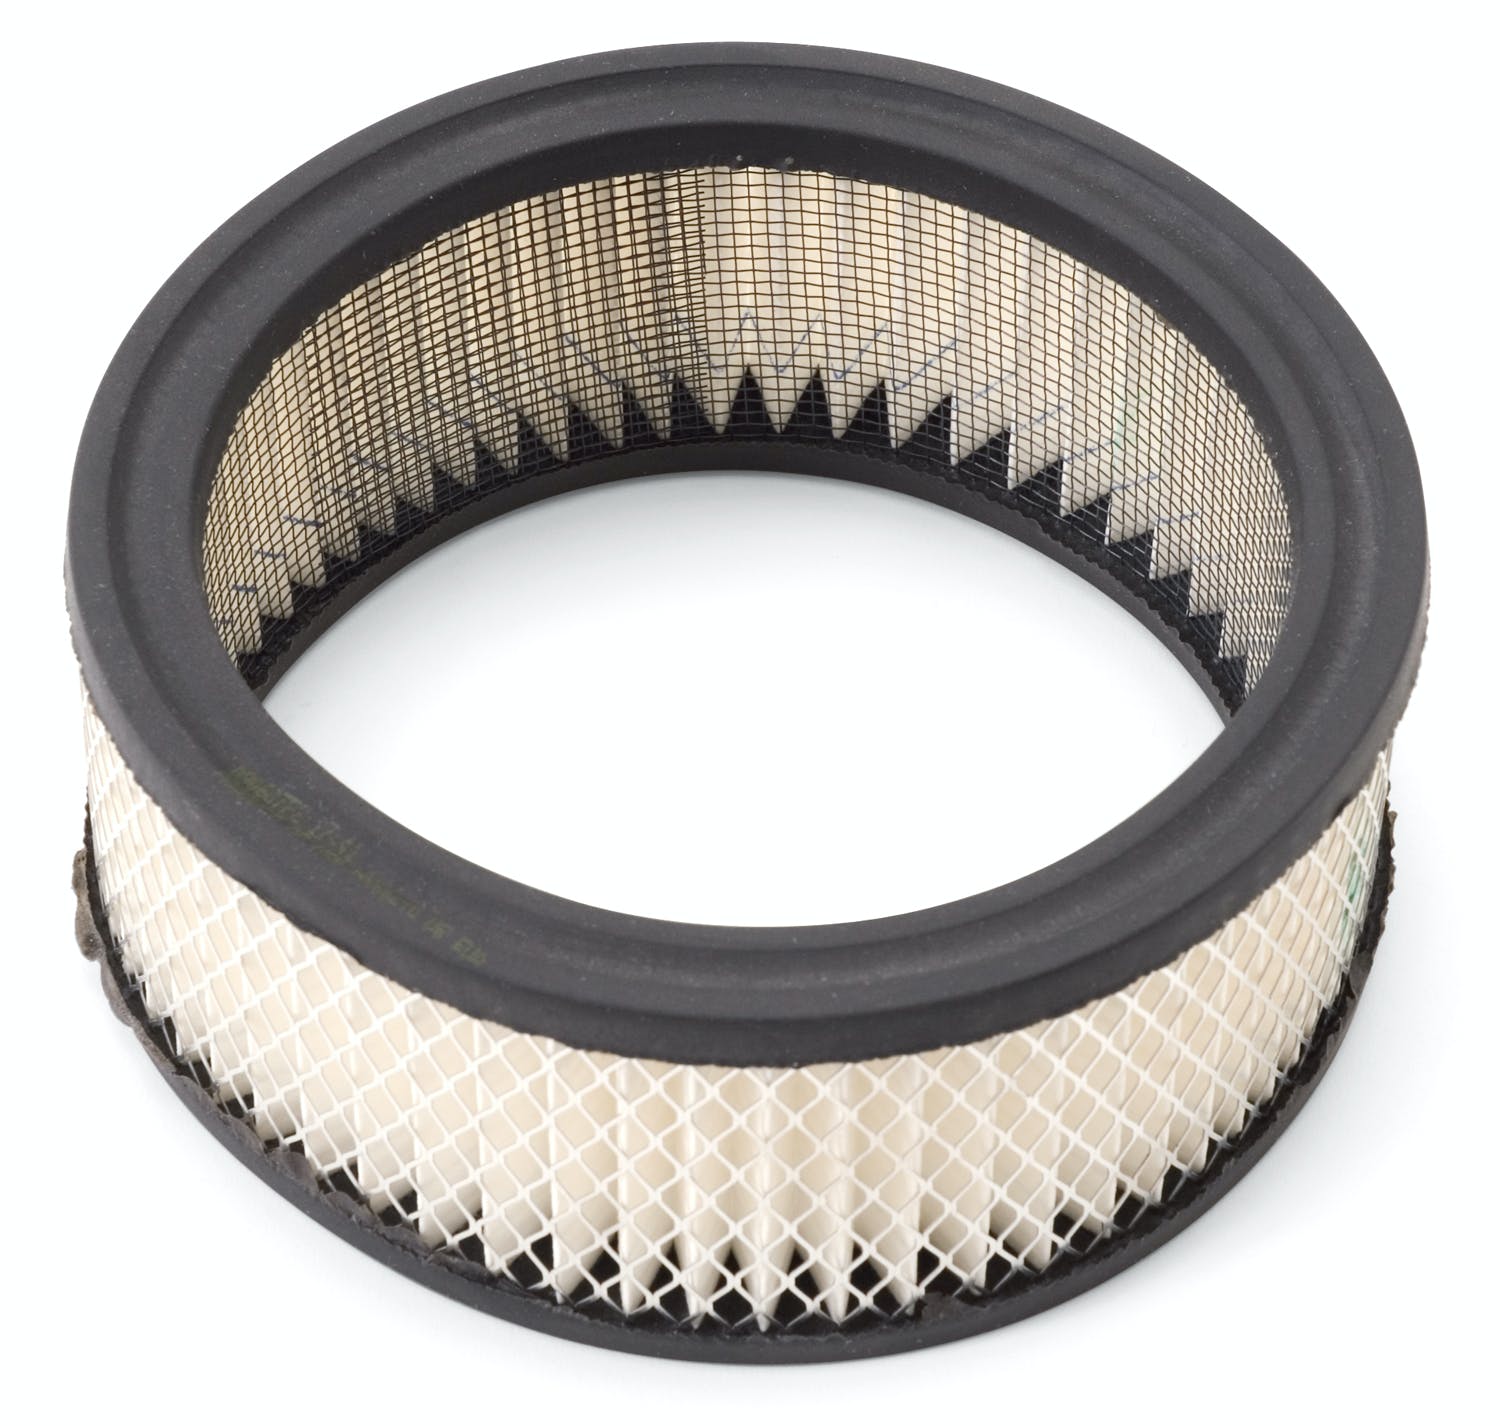 Edelbrock 1219 Replacement Paper Air Filter for Elite Series 6-3/8 Round Air Cleaners